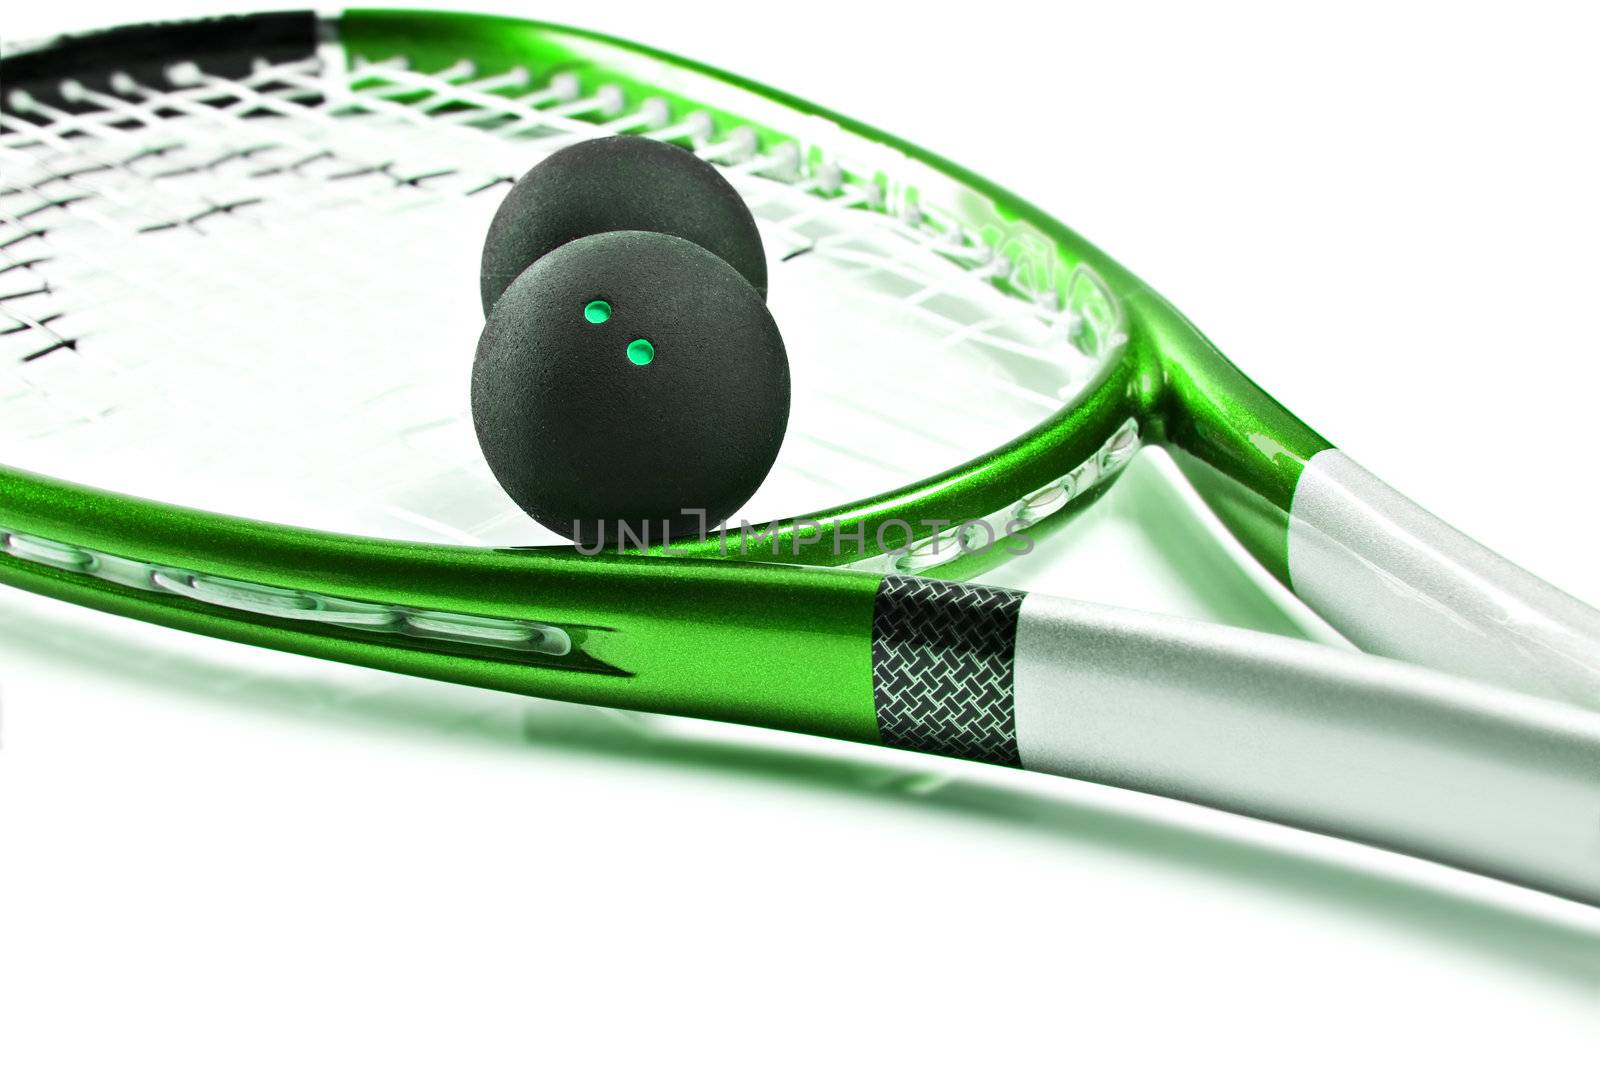 Green squash racket with balls on white by tish1